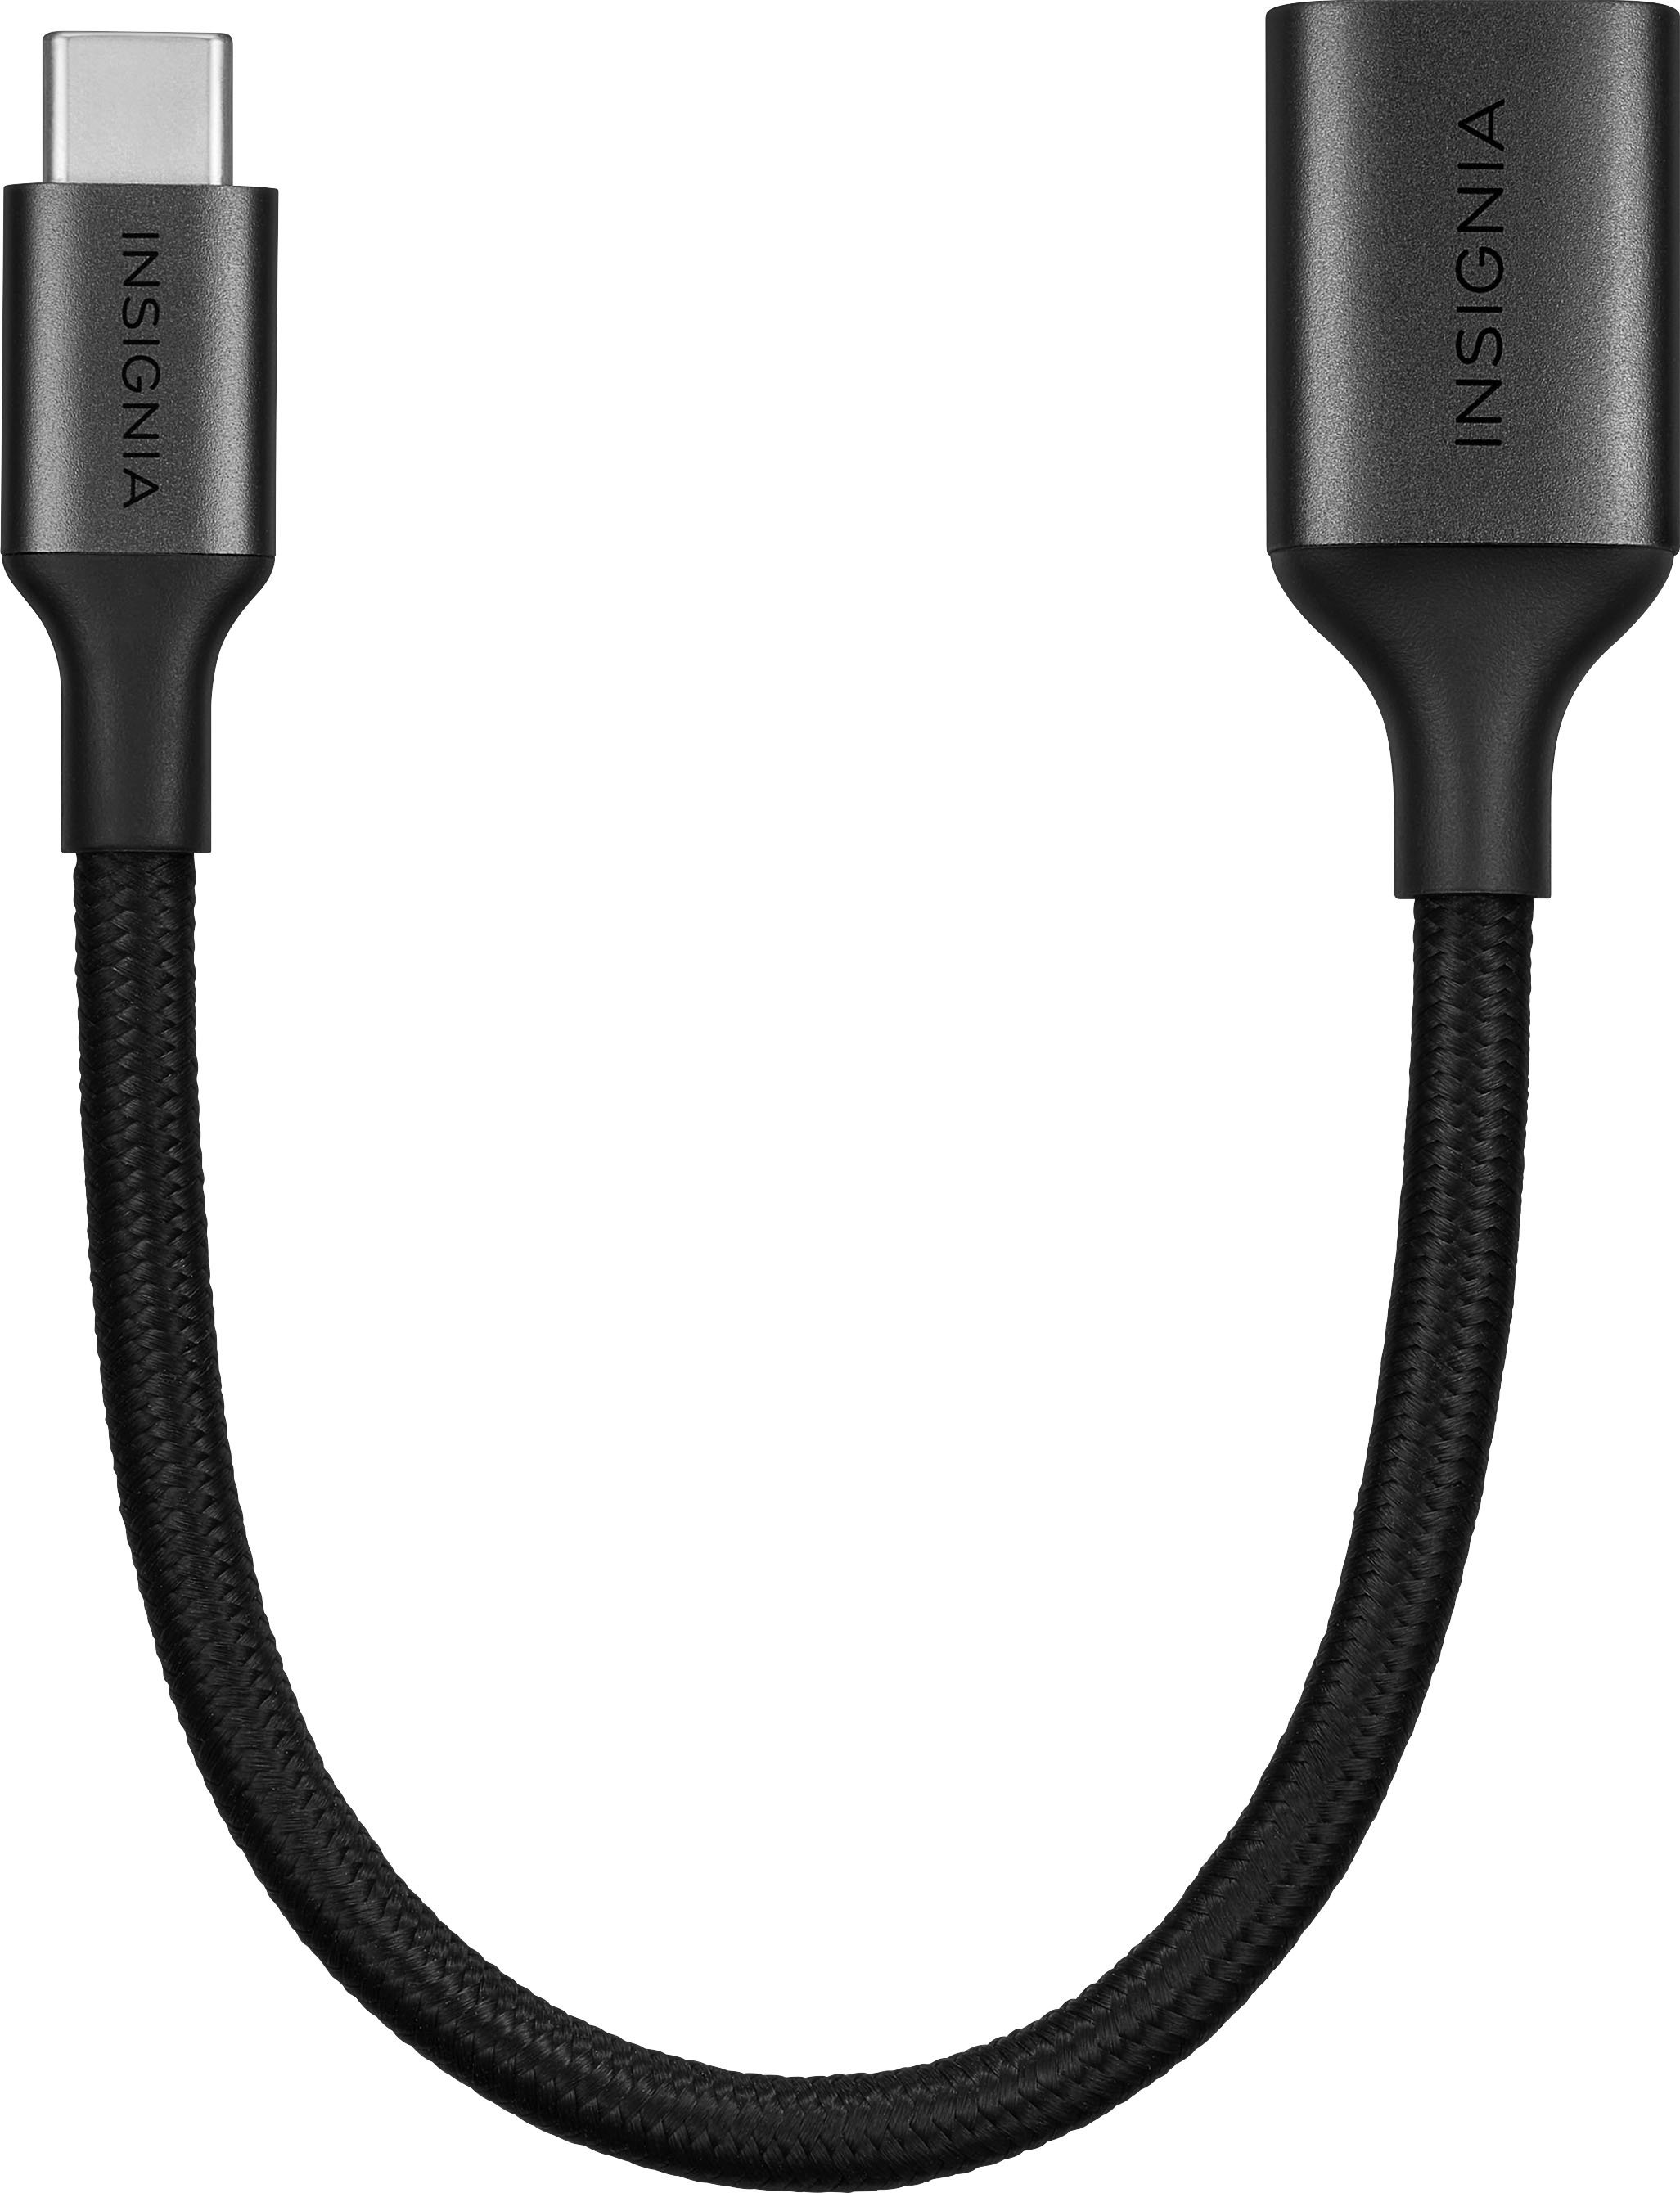 Left View: Insignia™ - USB-C to USB Adapter - Black